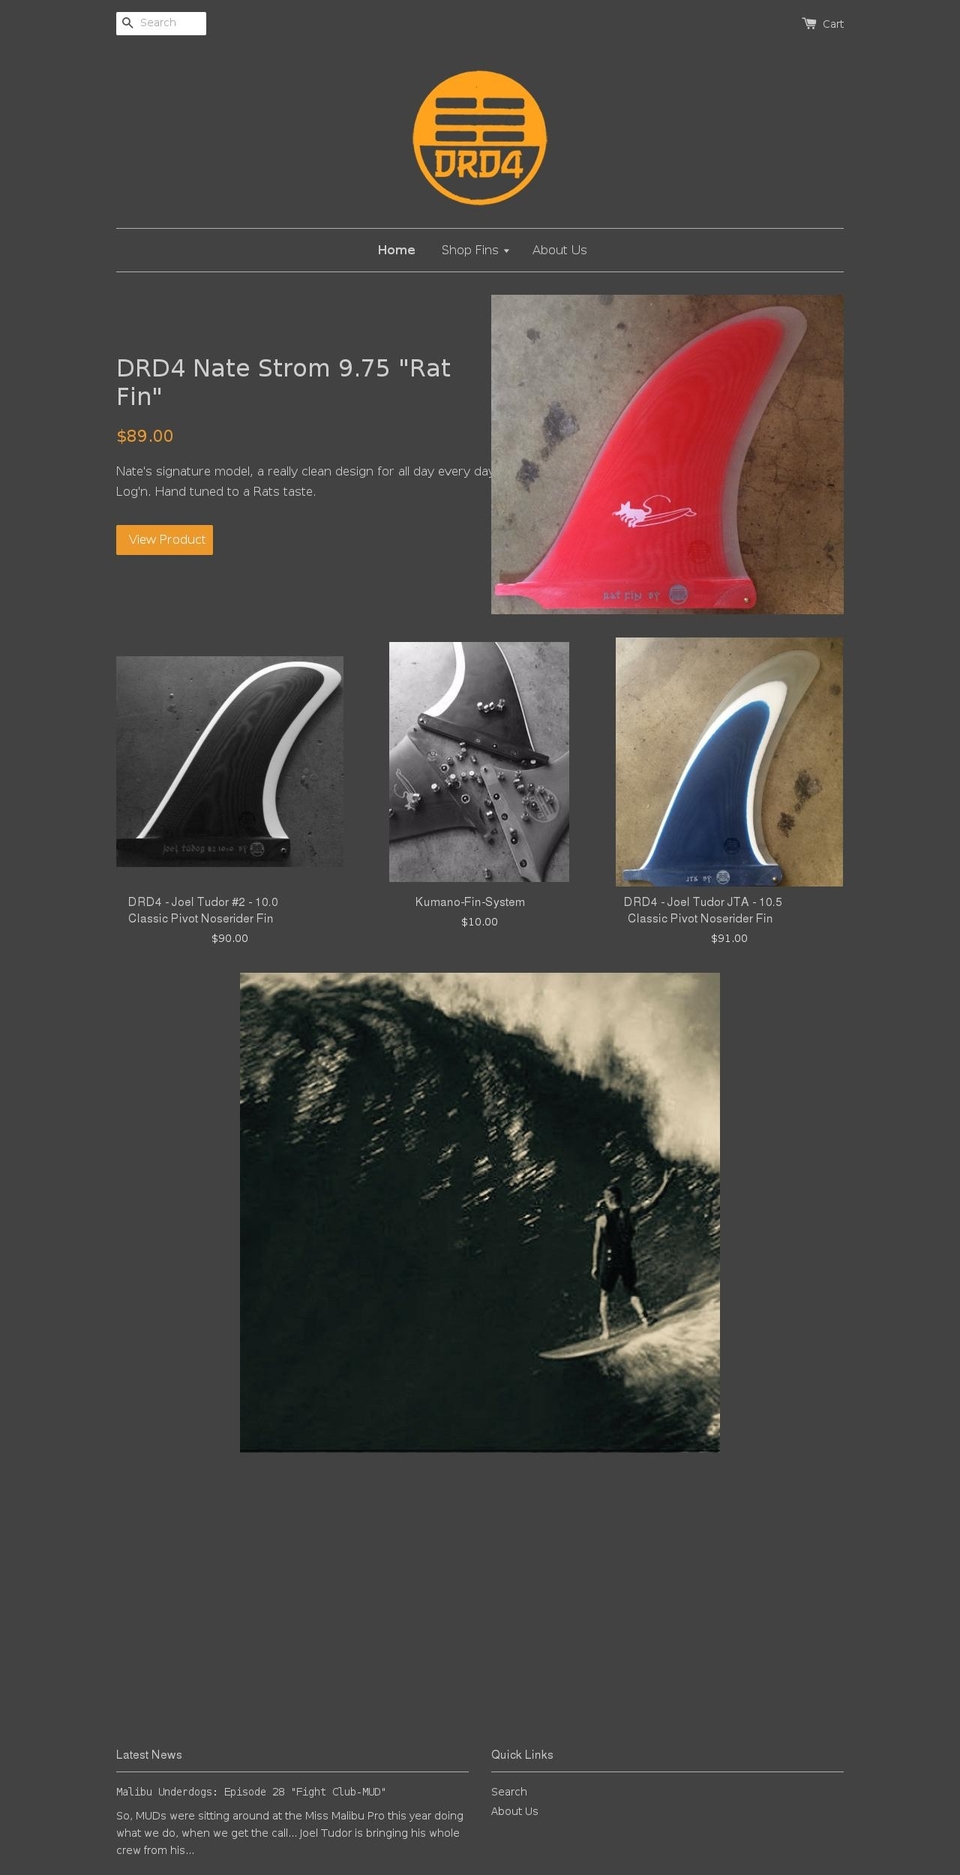 Live Shopify theme site example drd4fins.com